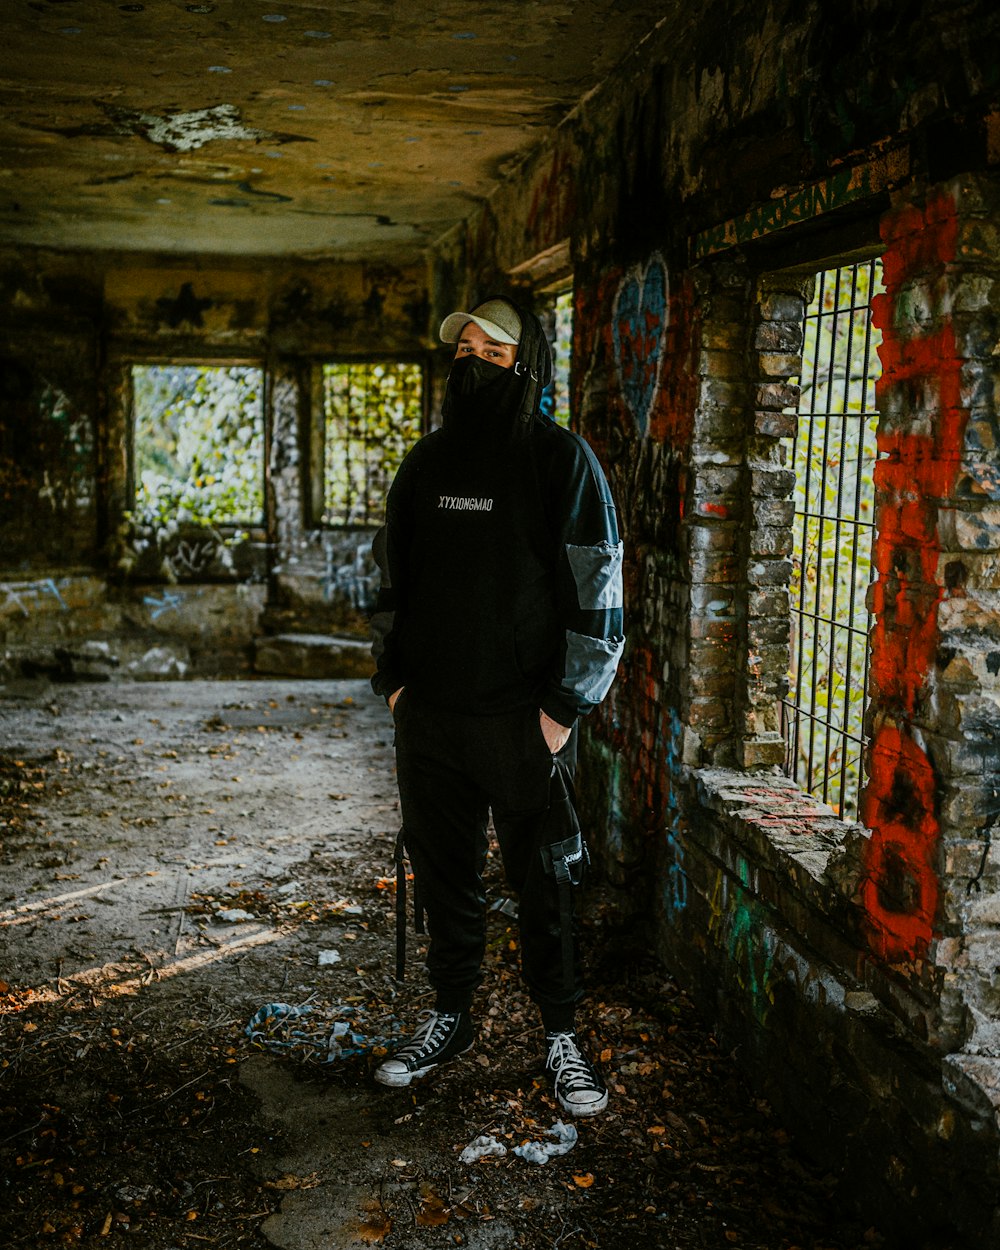 a man standing in an abandoned building with graffiti on the walls